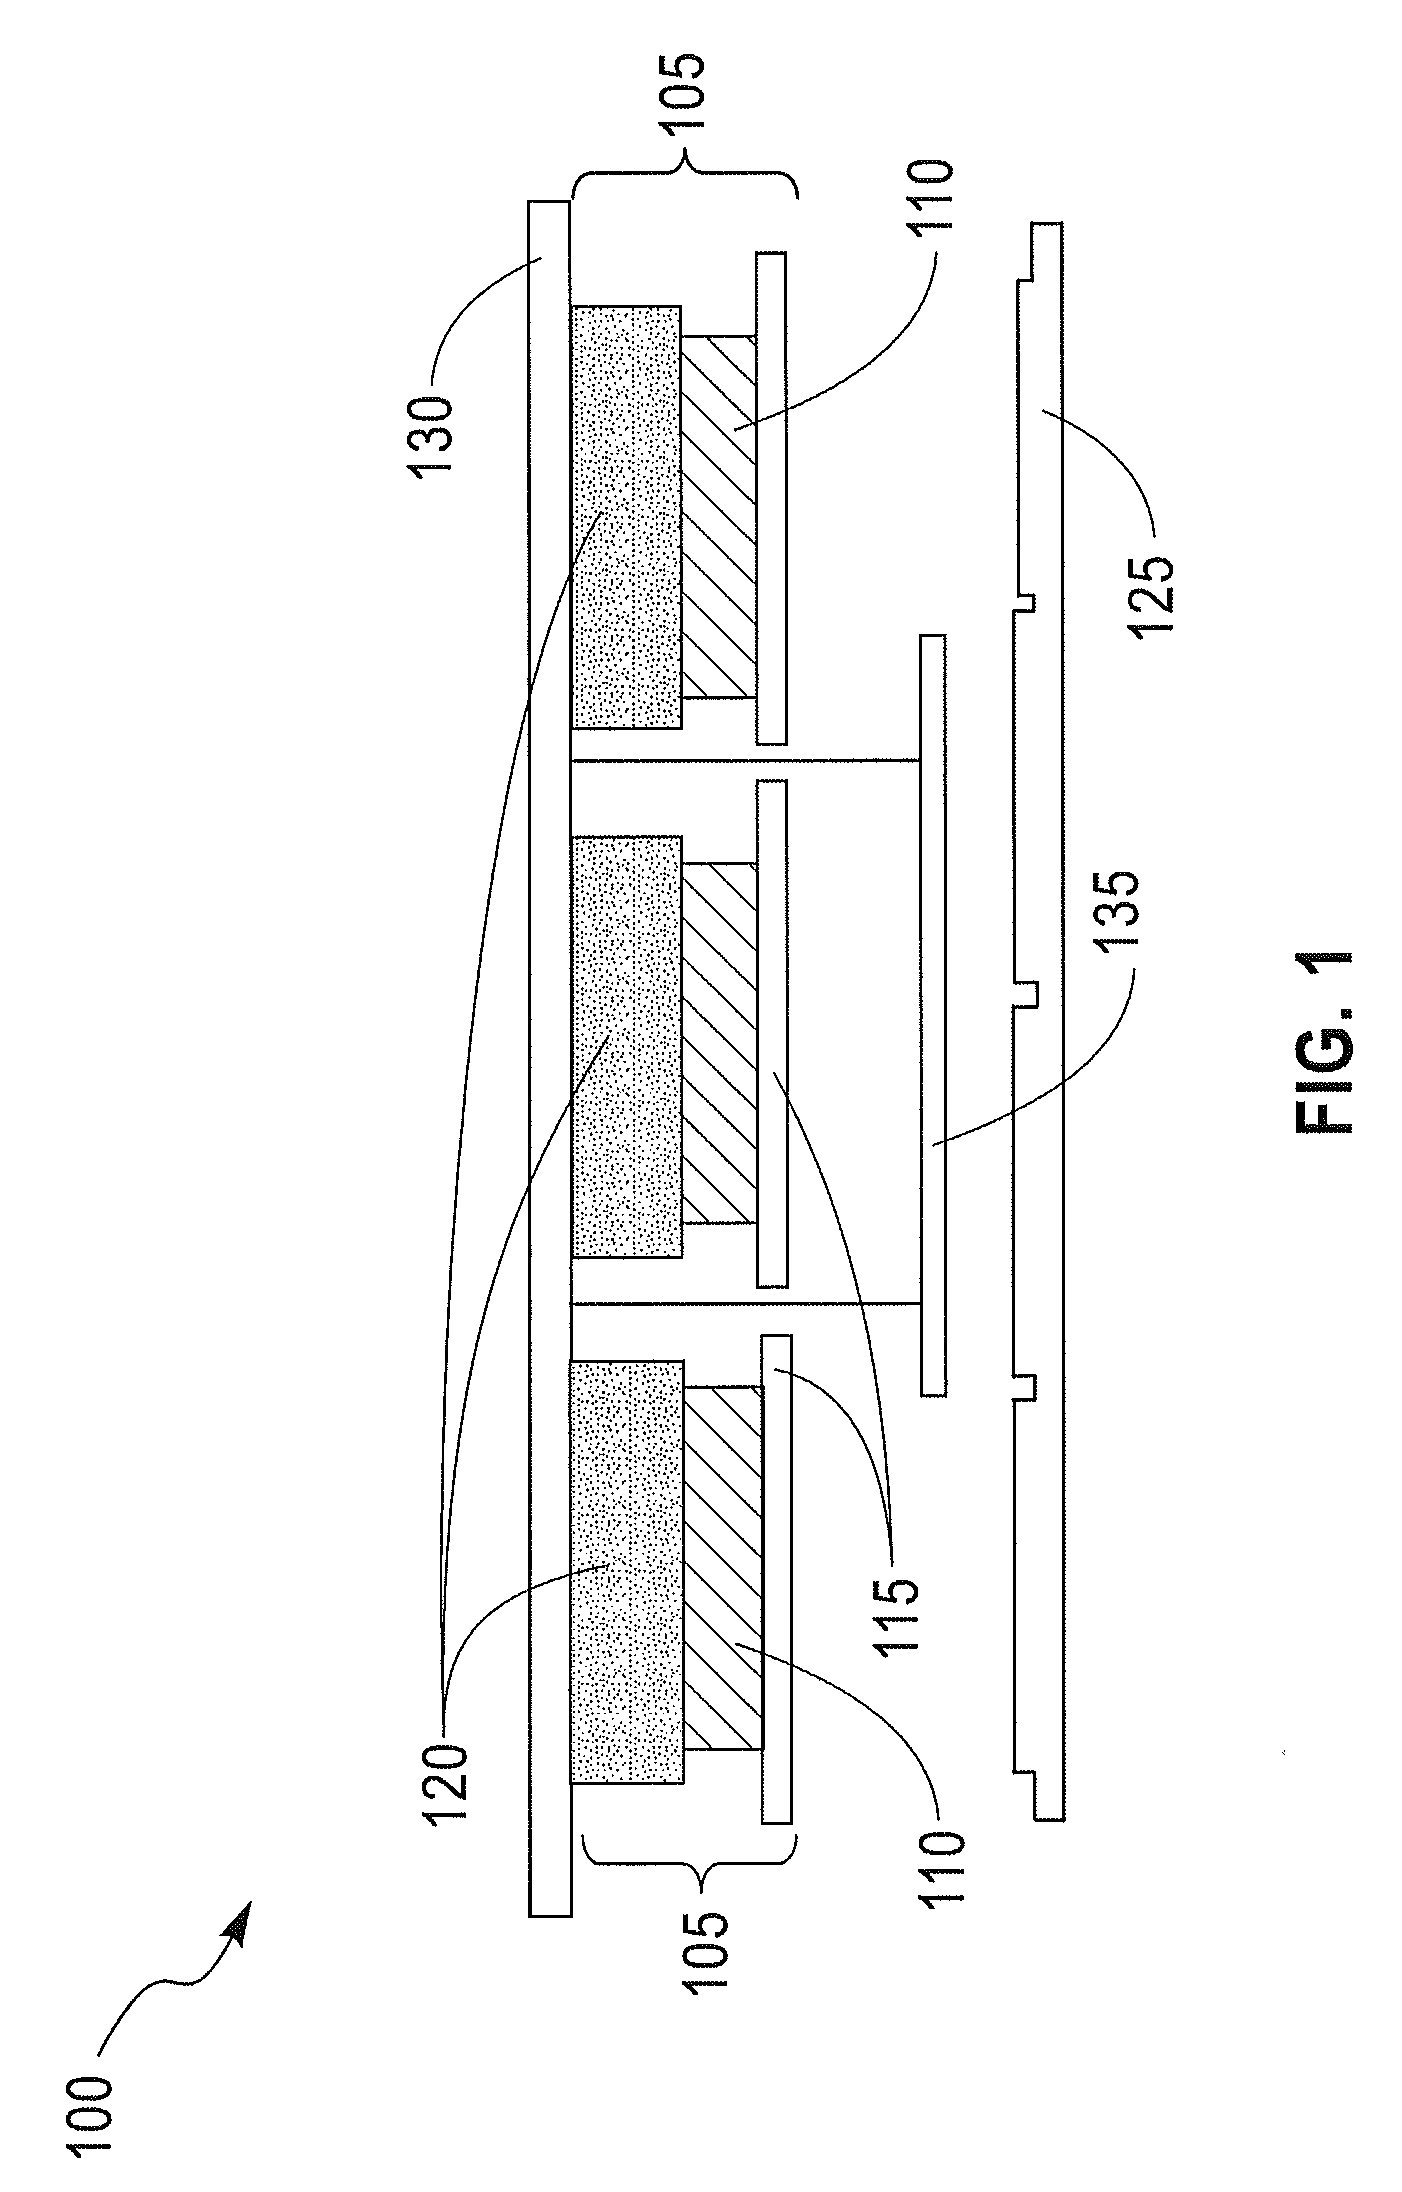 Large-area alpha-particle detector and method for use